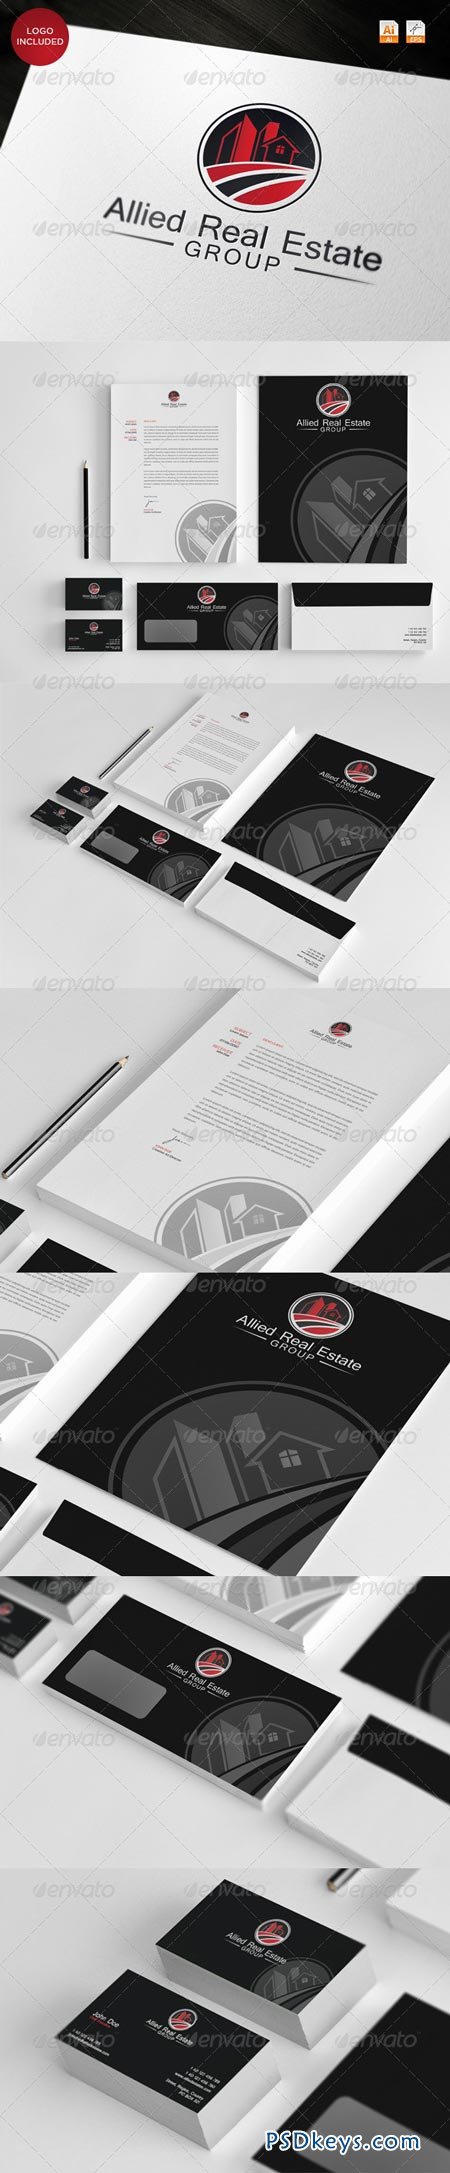 Corporate Identity - Allied Real Estate 3668088